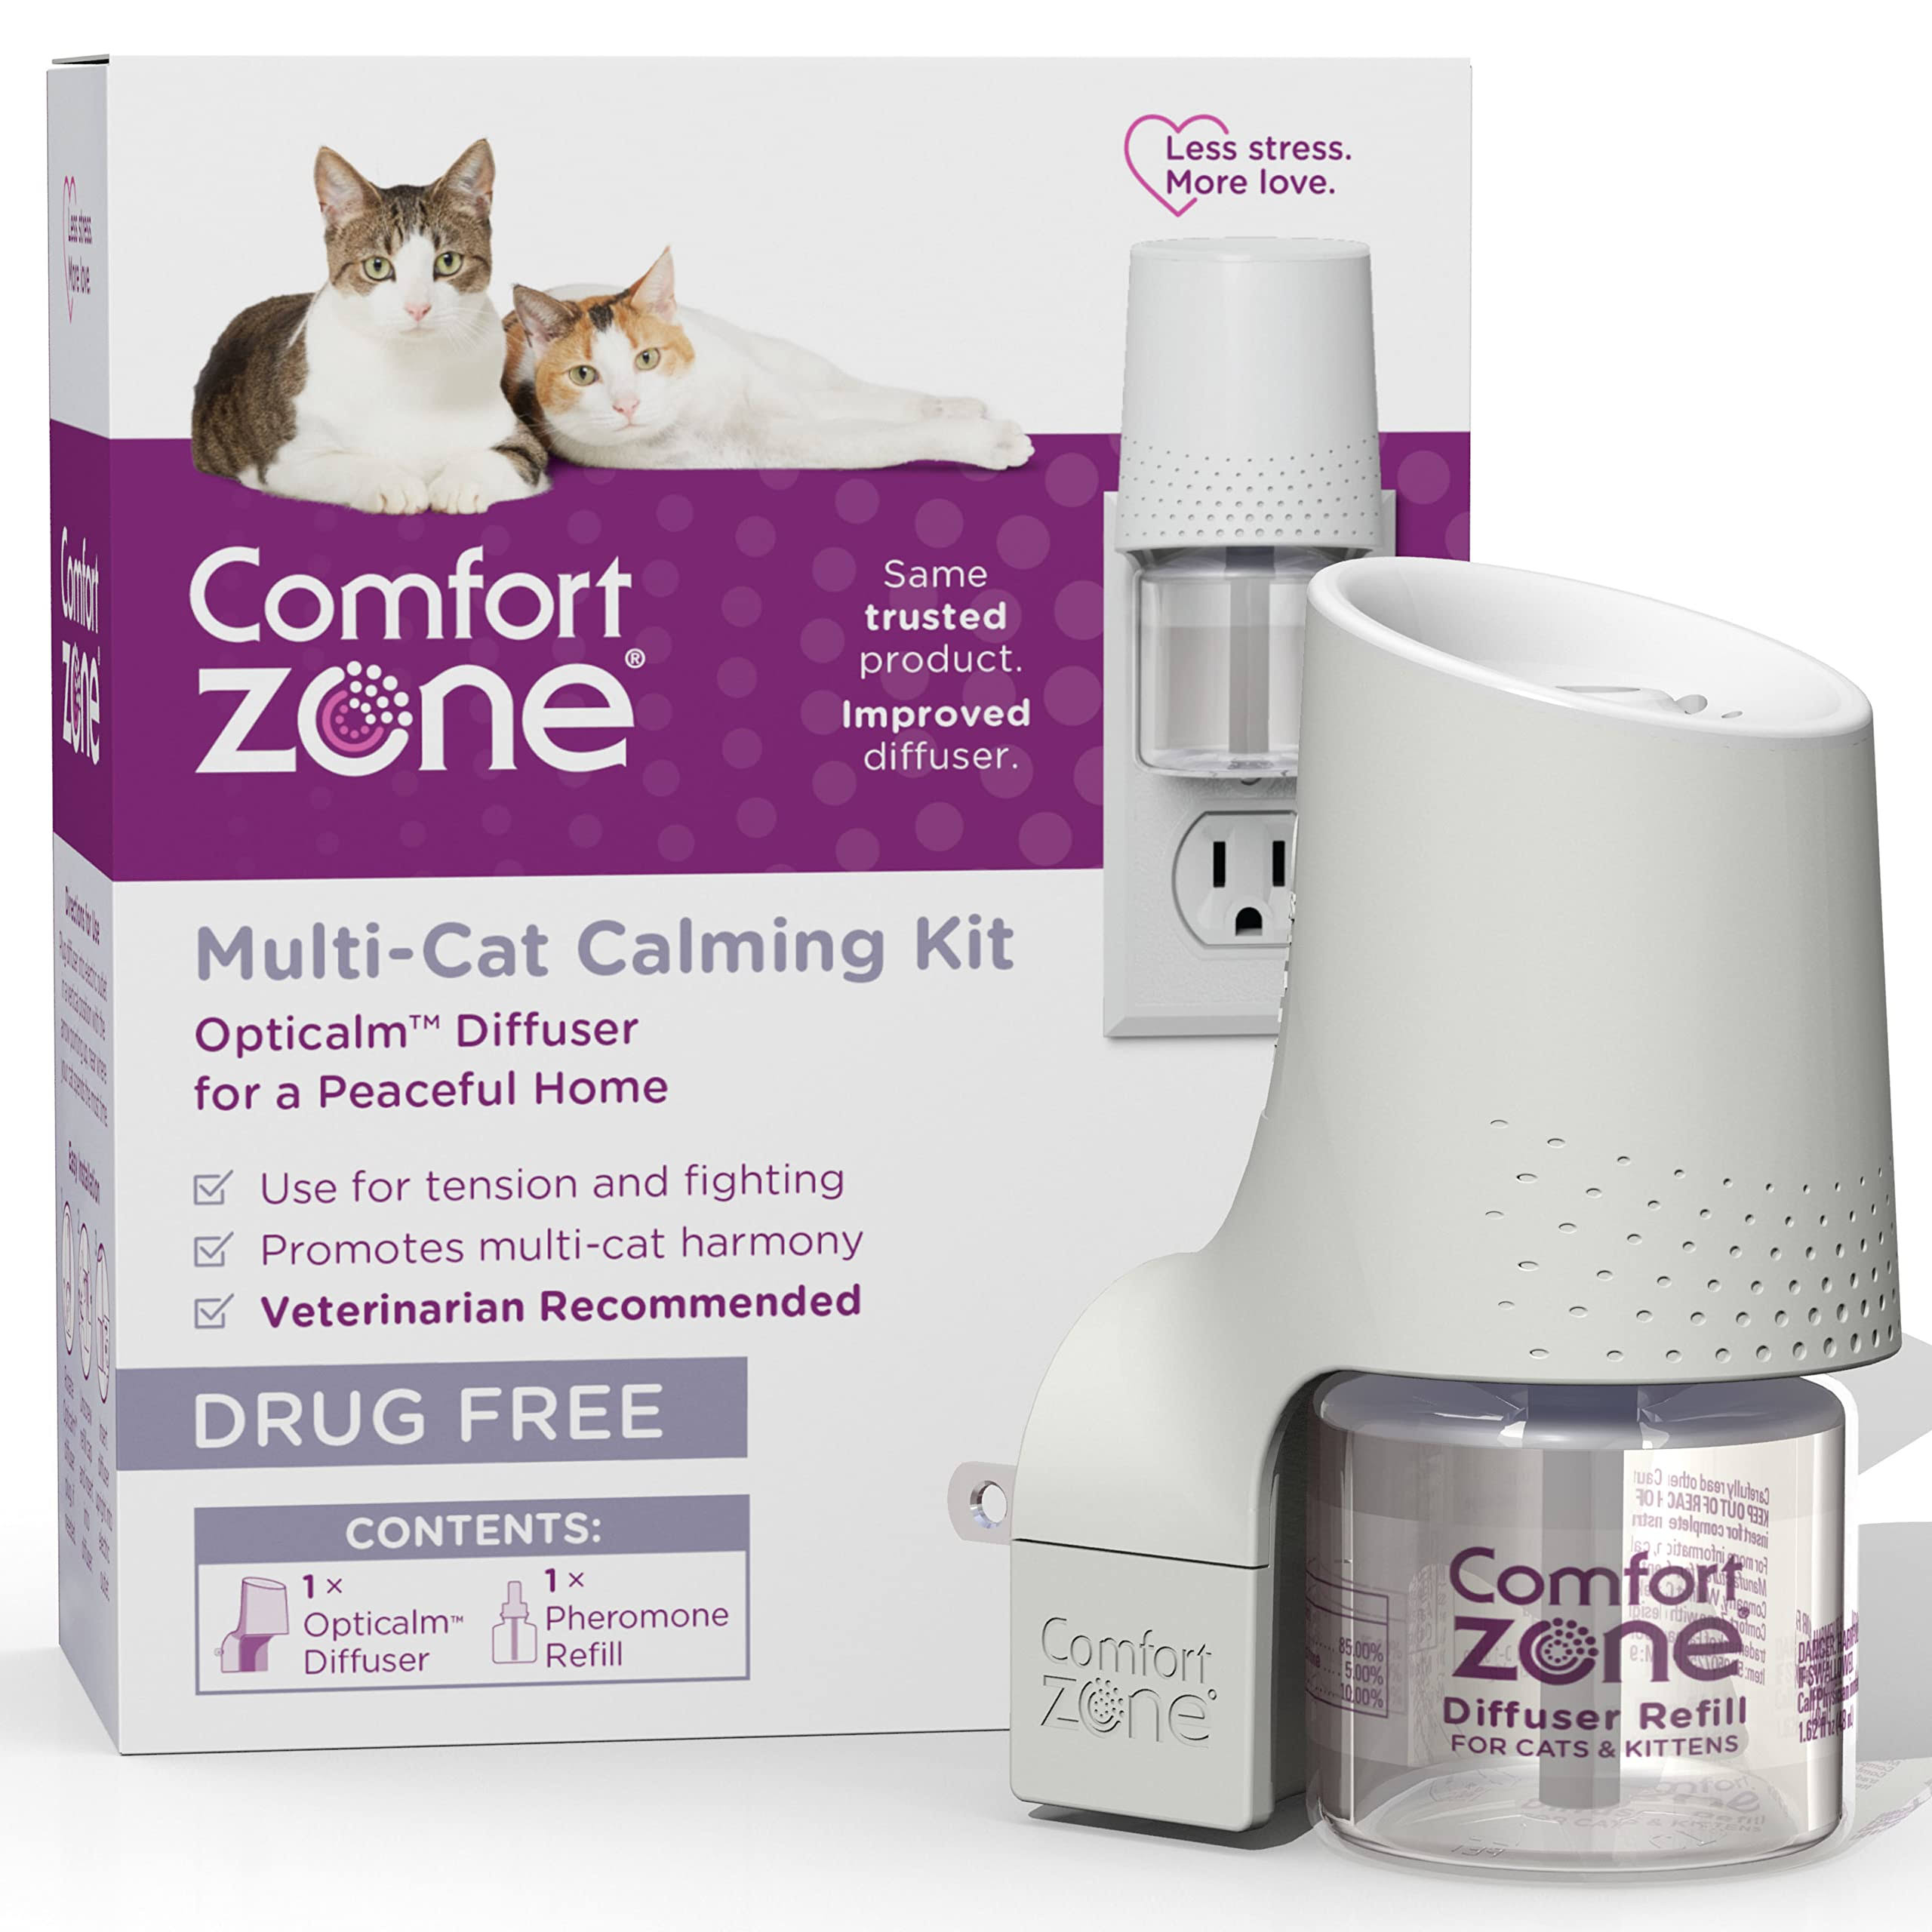 Comfort Zone Multi-Cat Diffuser Kit for Cats and Kittens - 1 Count